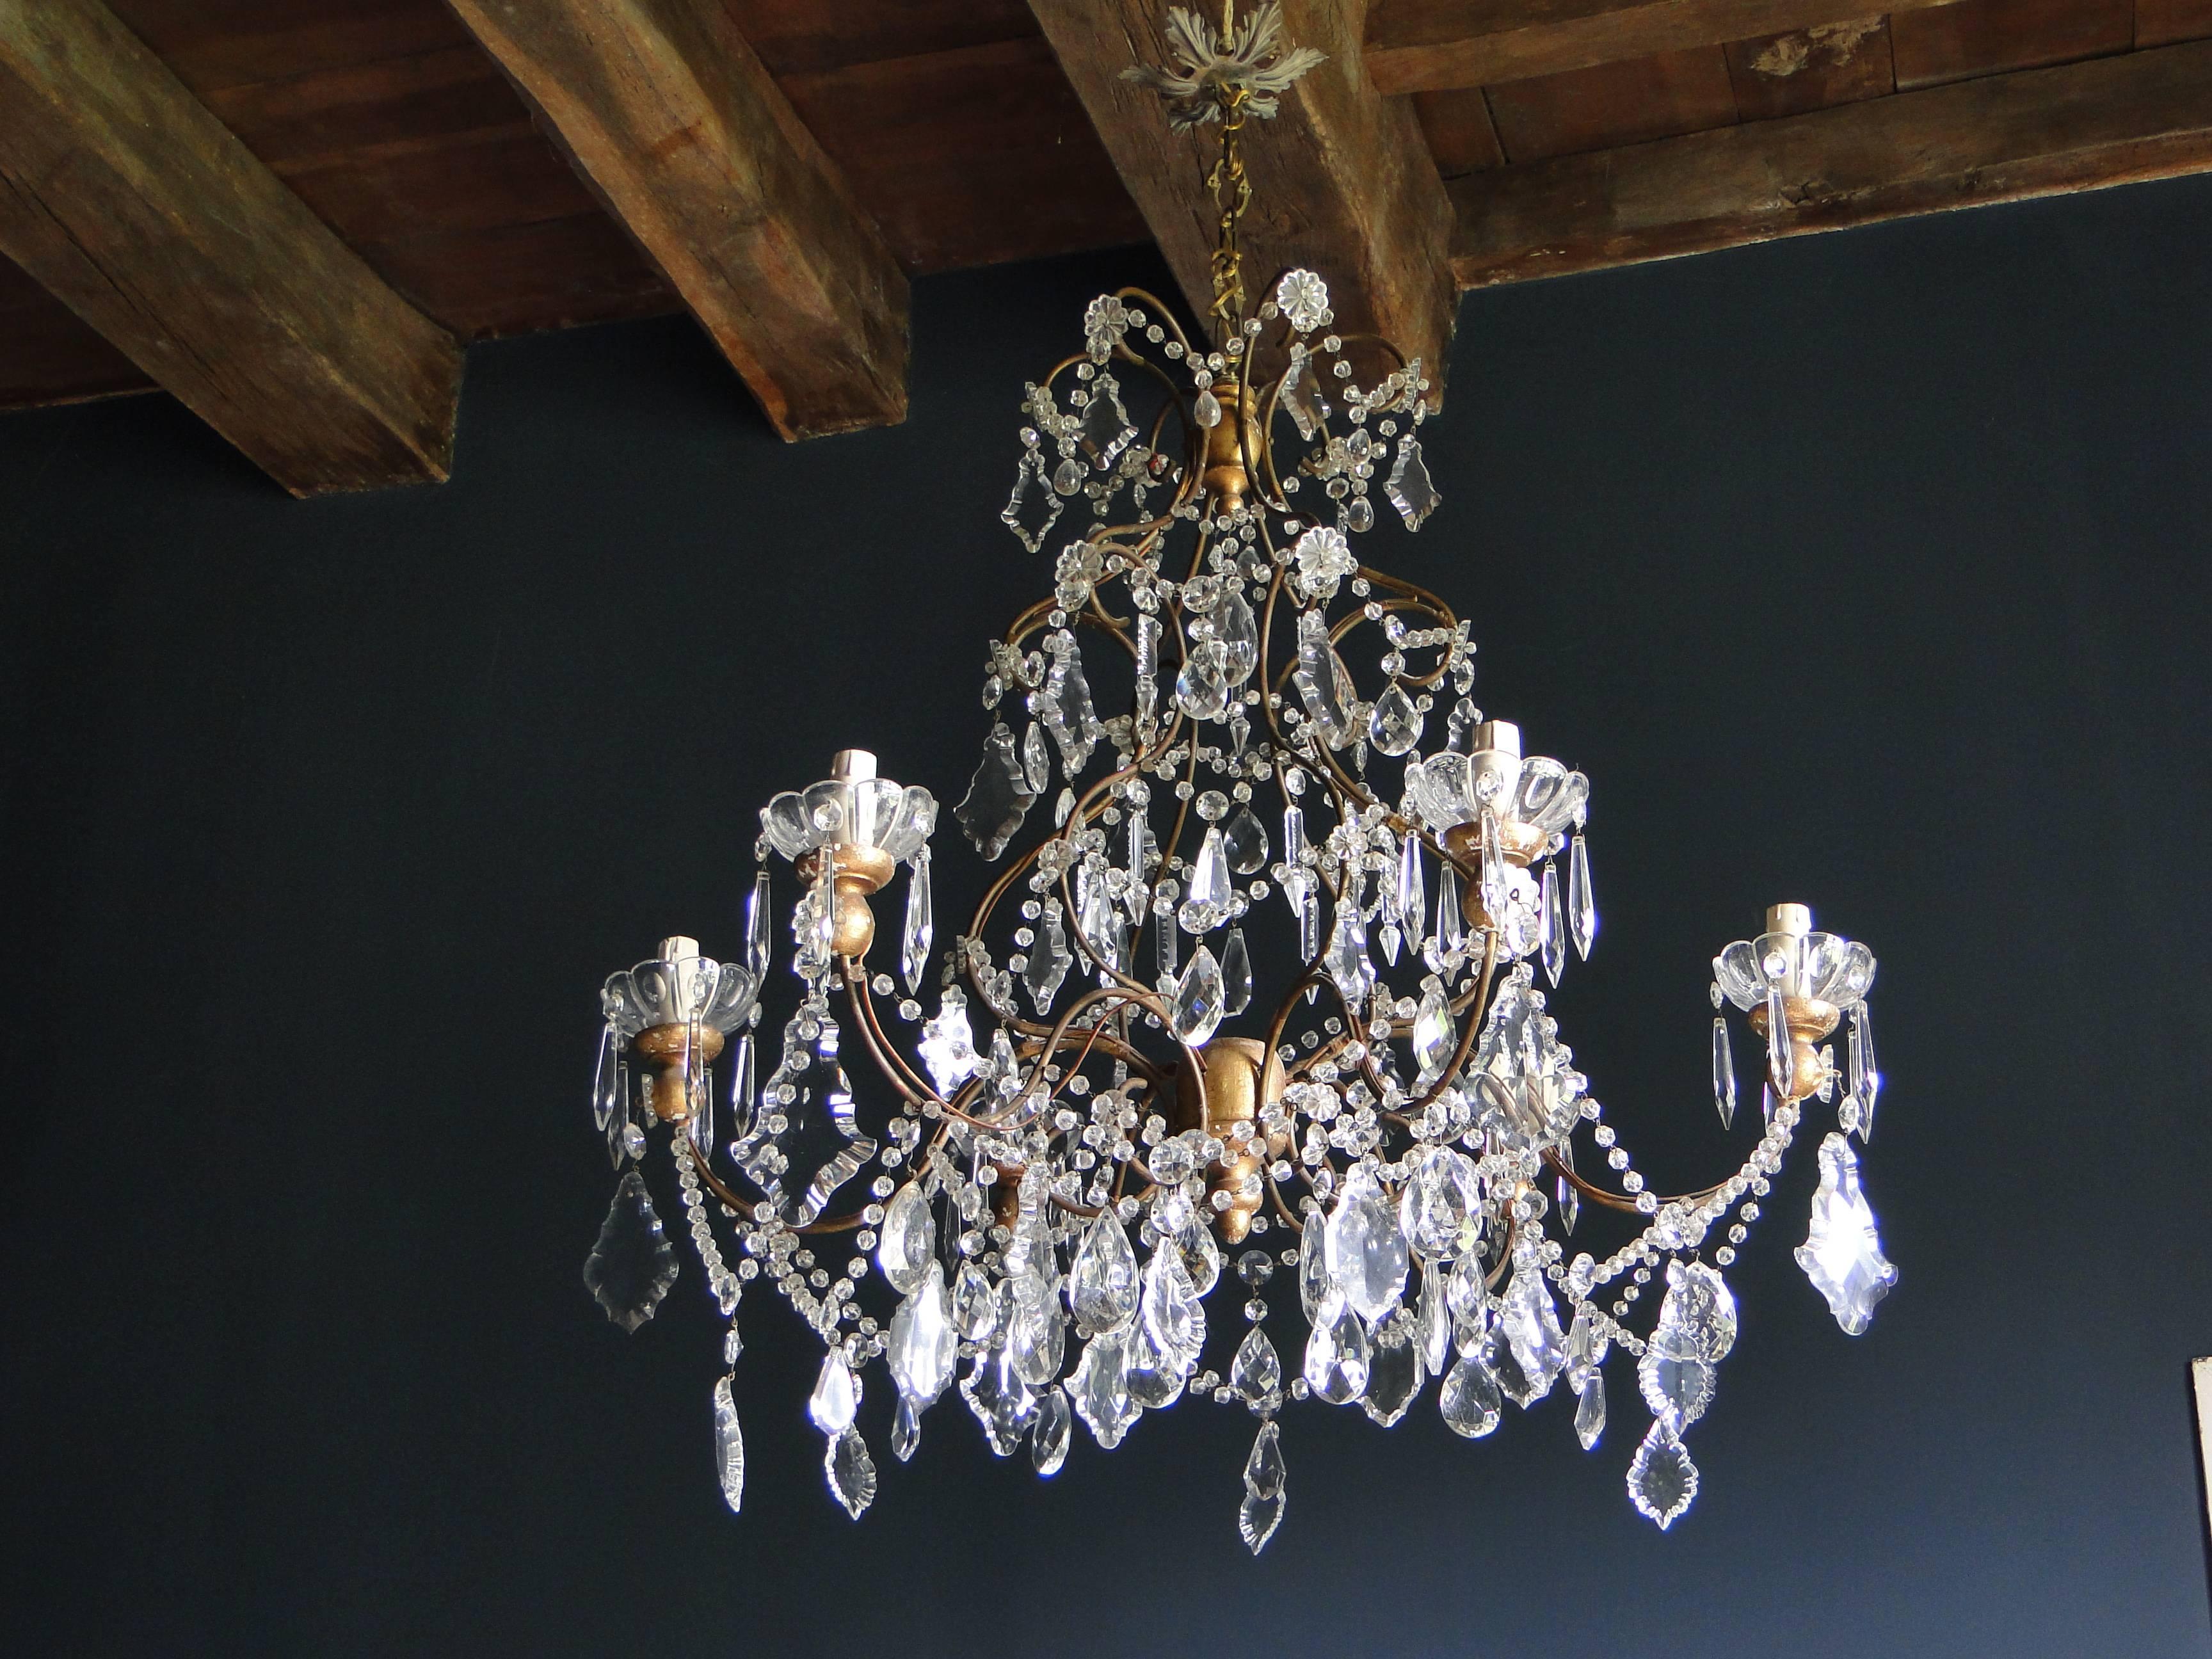 Beautiful Italian chandelier iron and wood with crystal and glass beads and pendants.